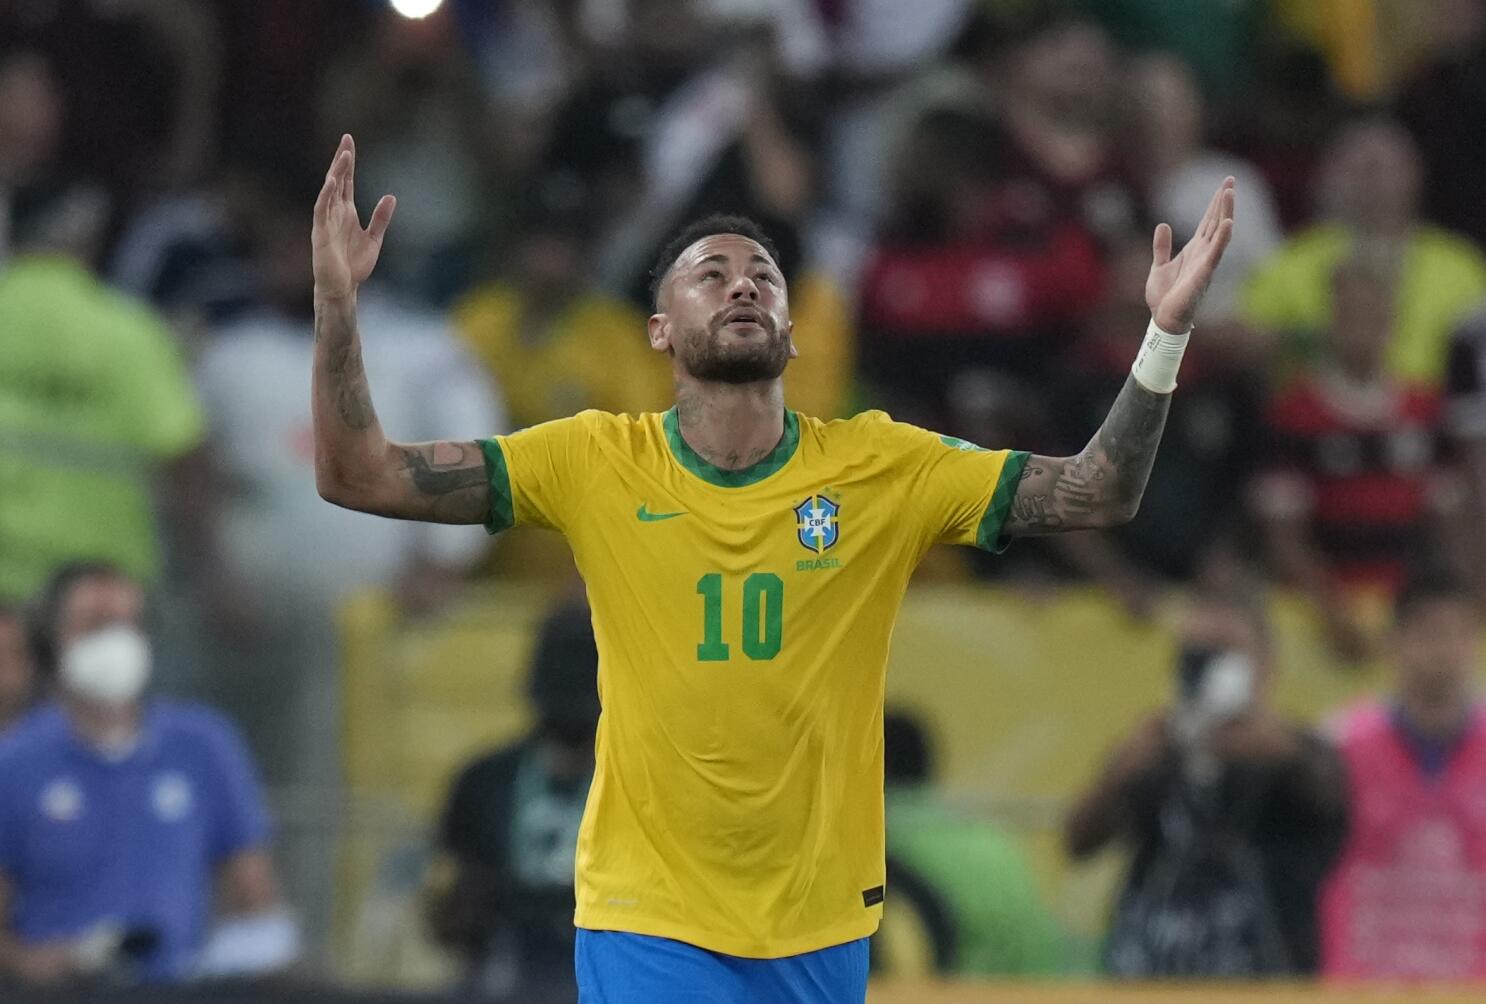 Champions - Brazil's World Cup squad littered with league titles